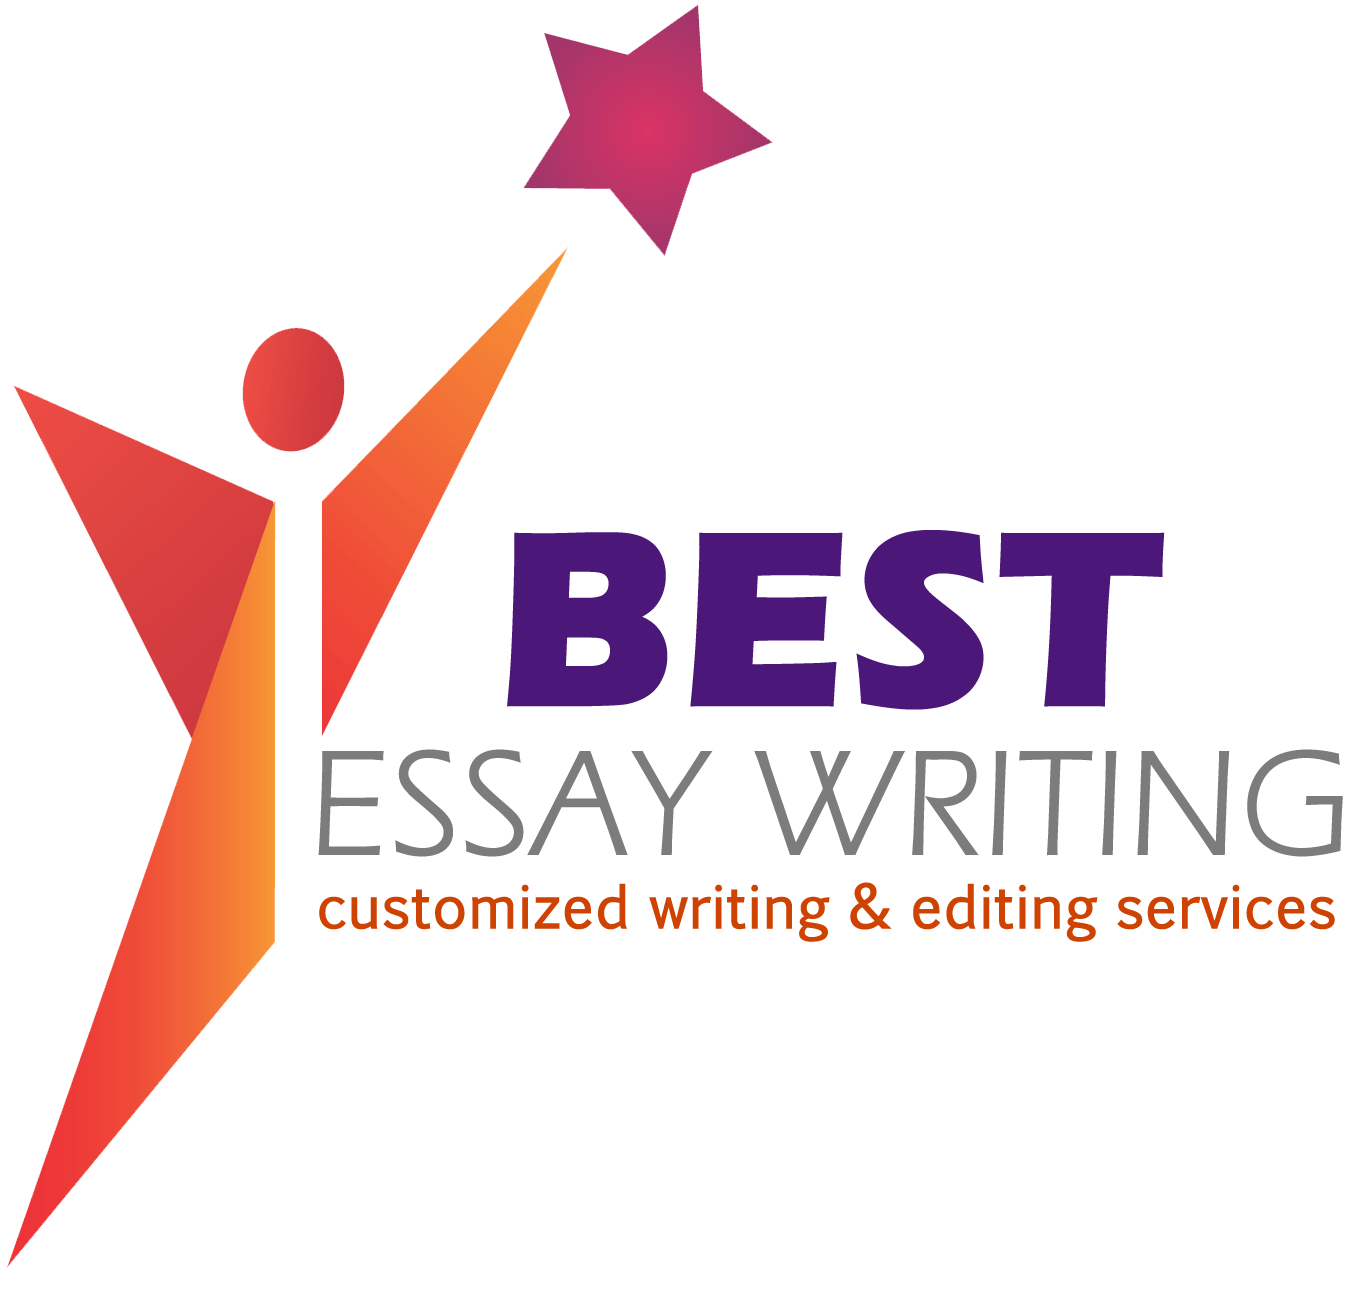 buy essay: This Is What Professionals Do